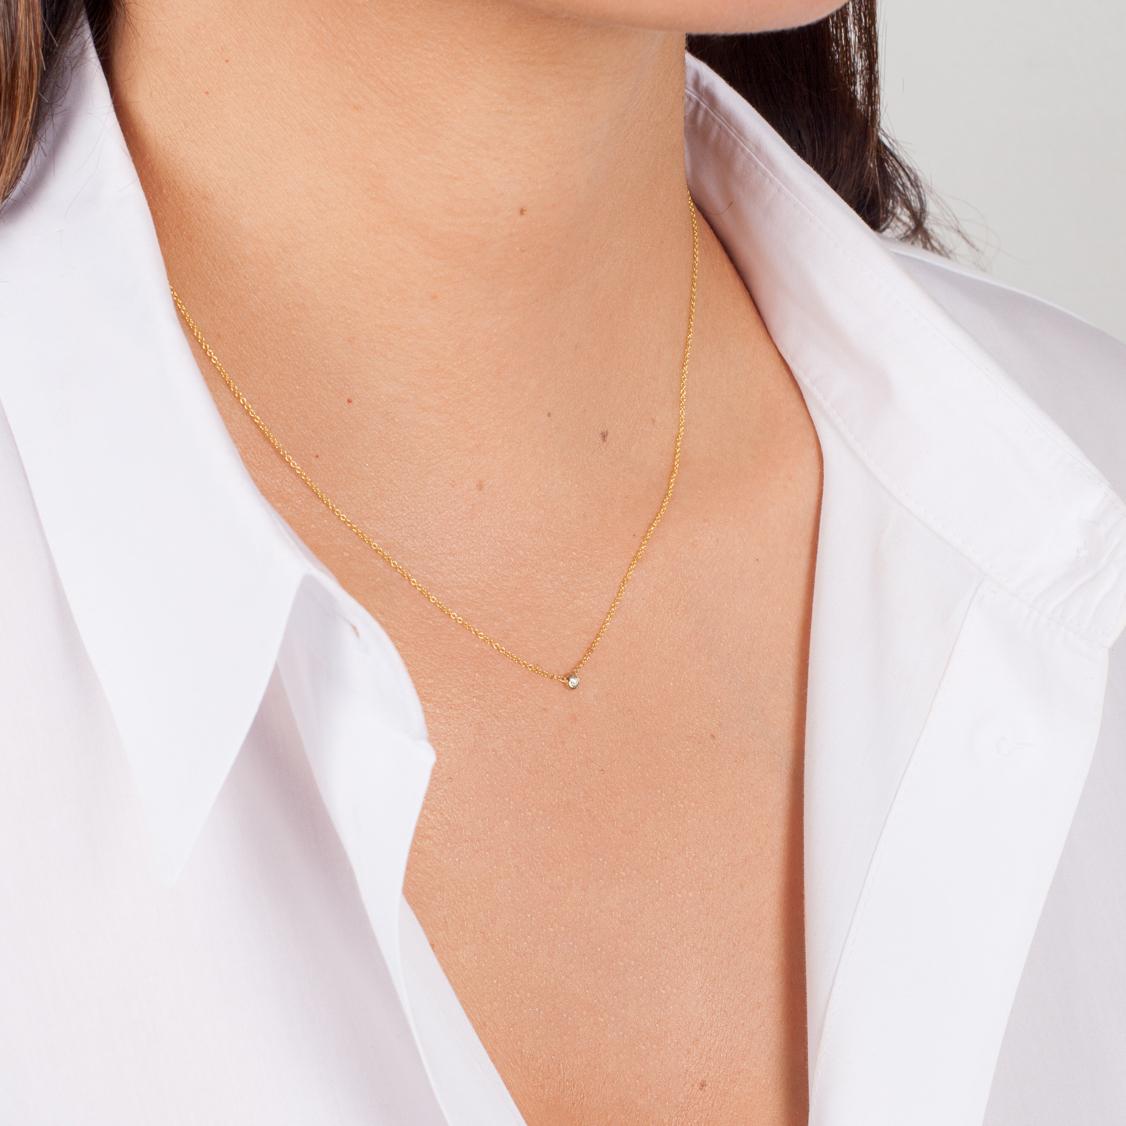 Beautifully handcrafted round single diamond in a 14k solid gold mini bezel cup hanging from a dainty cable link chain. Chic and timeless, wear it by itself or layered, day or night.

Made in L.A.
14k Yellow Gold
16